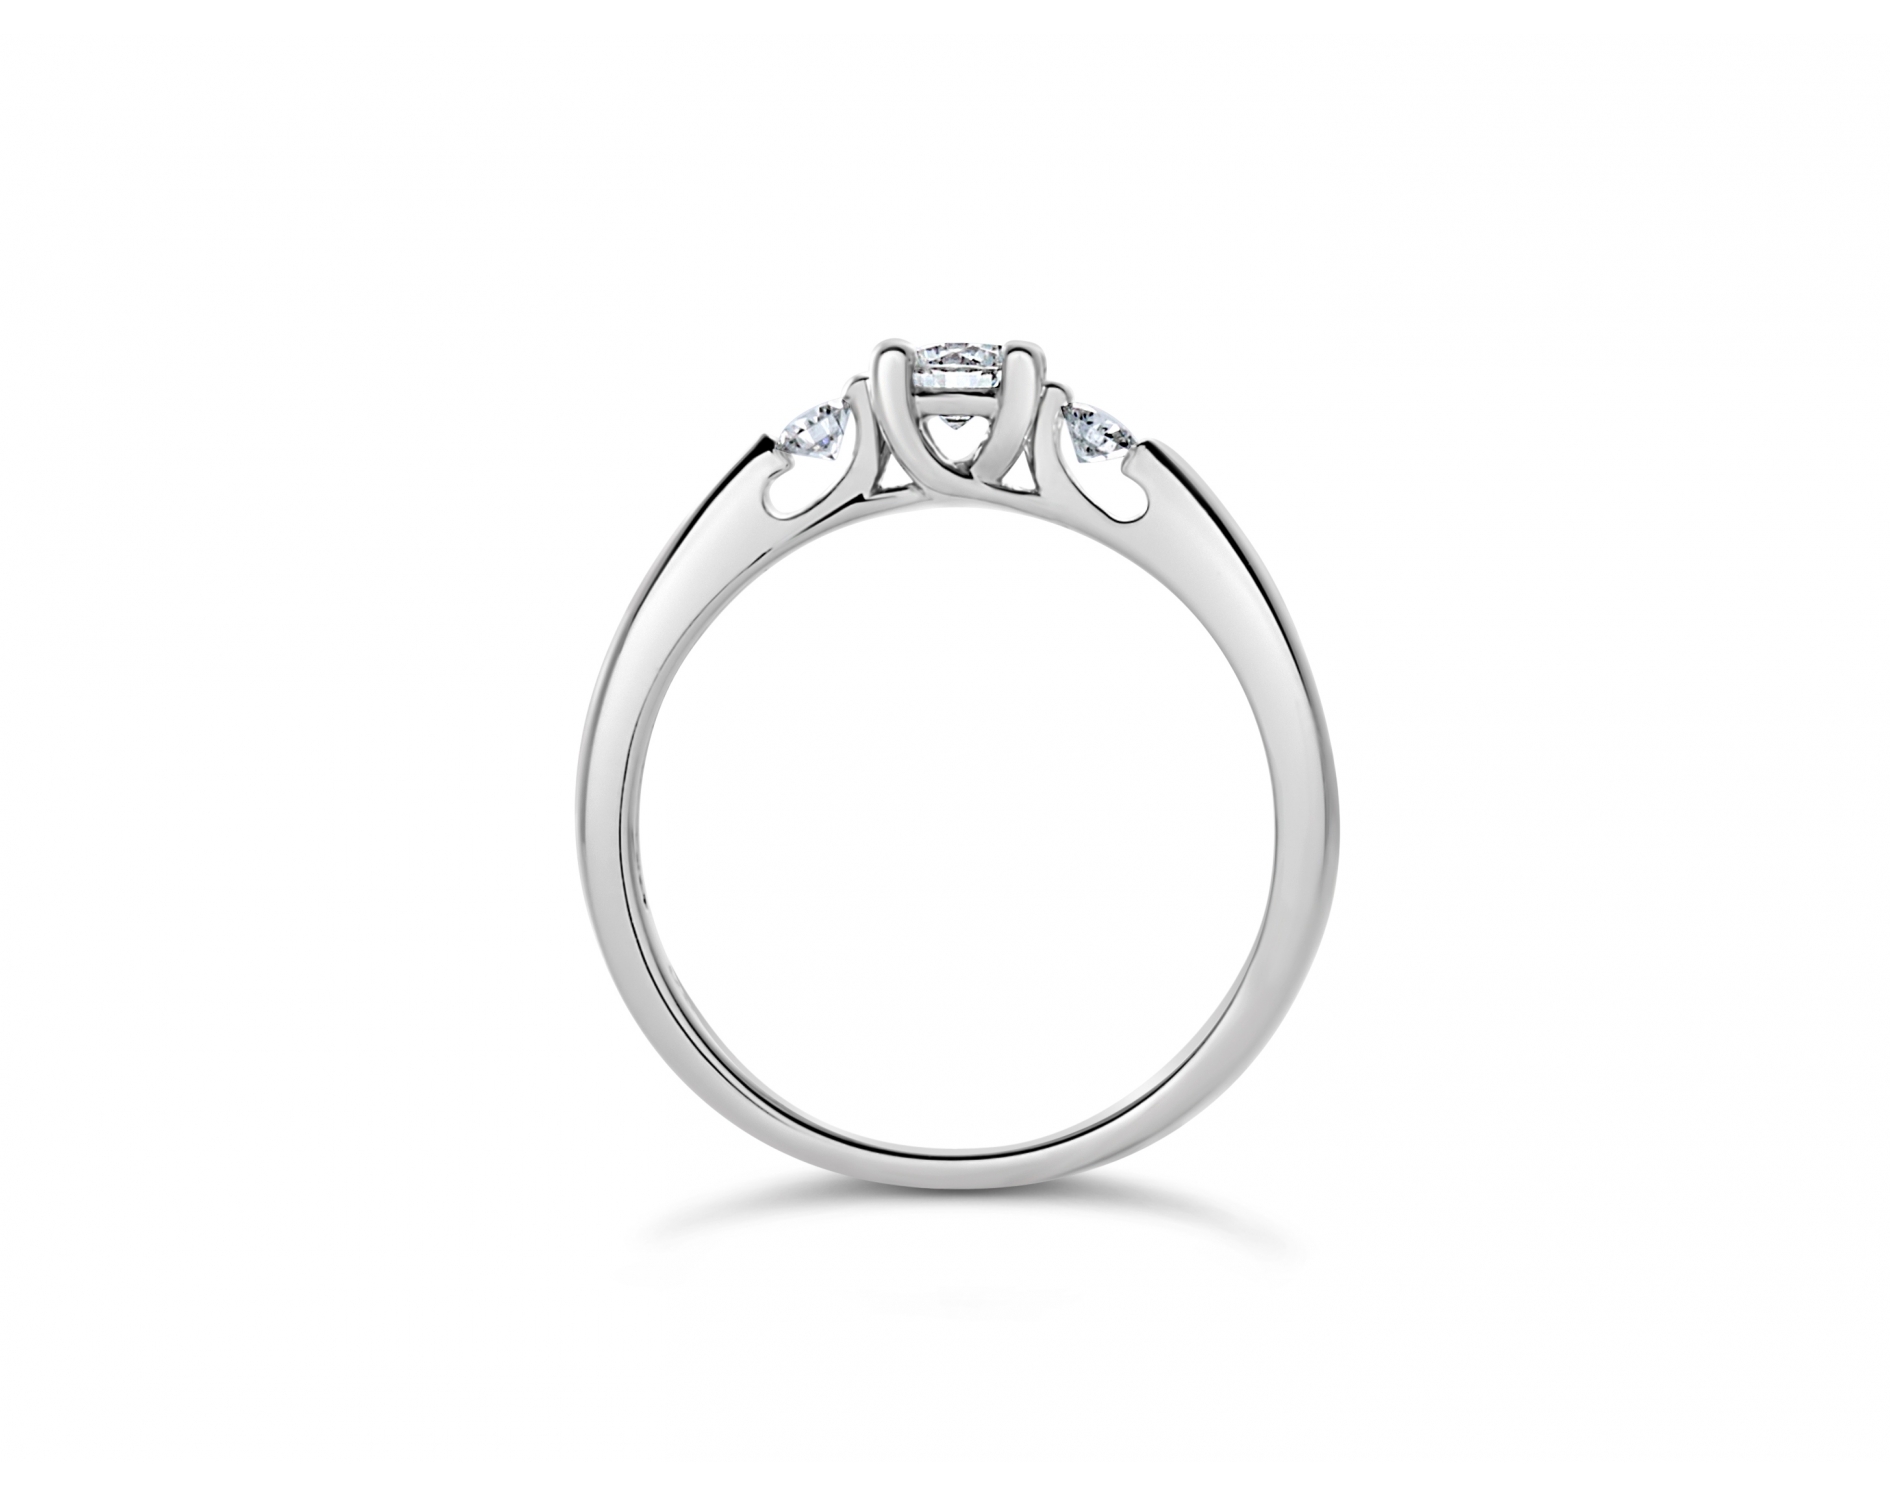 18k white gold 4 prong open gallery three stone engagement ring Photos & images